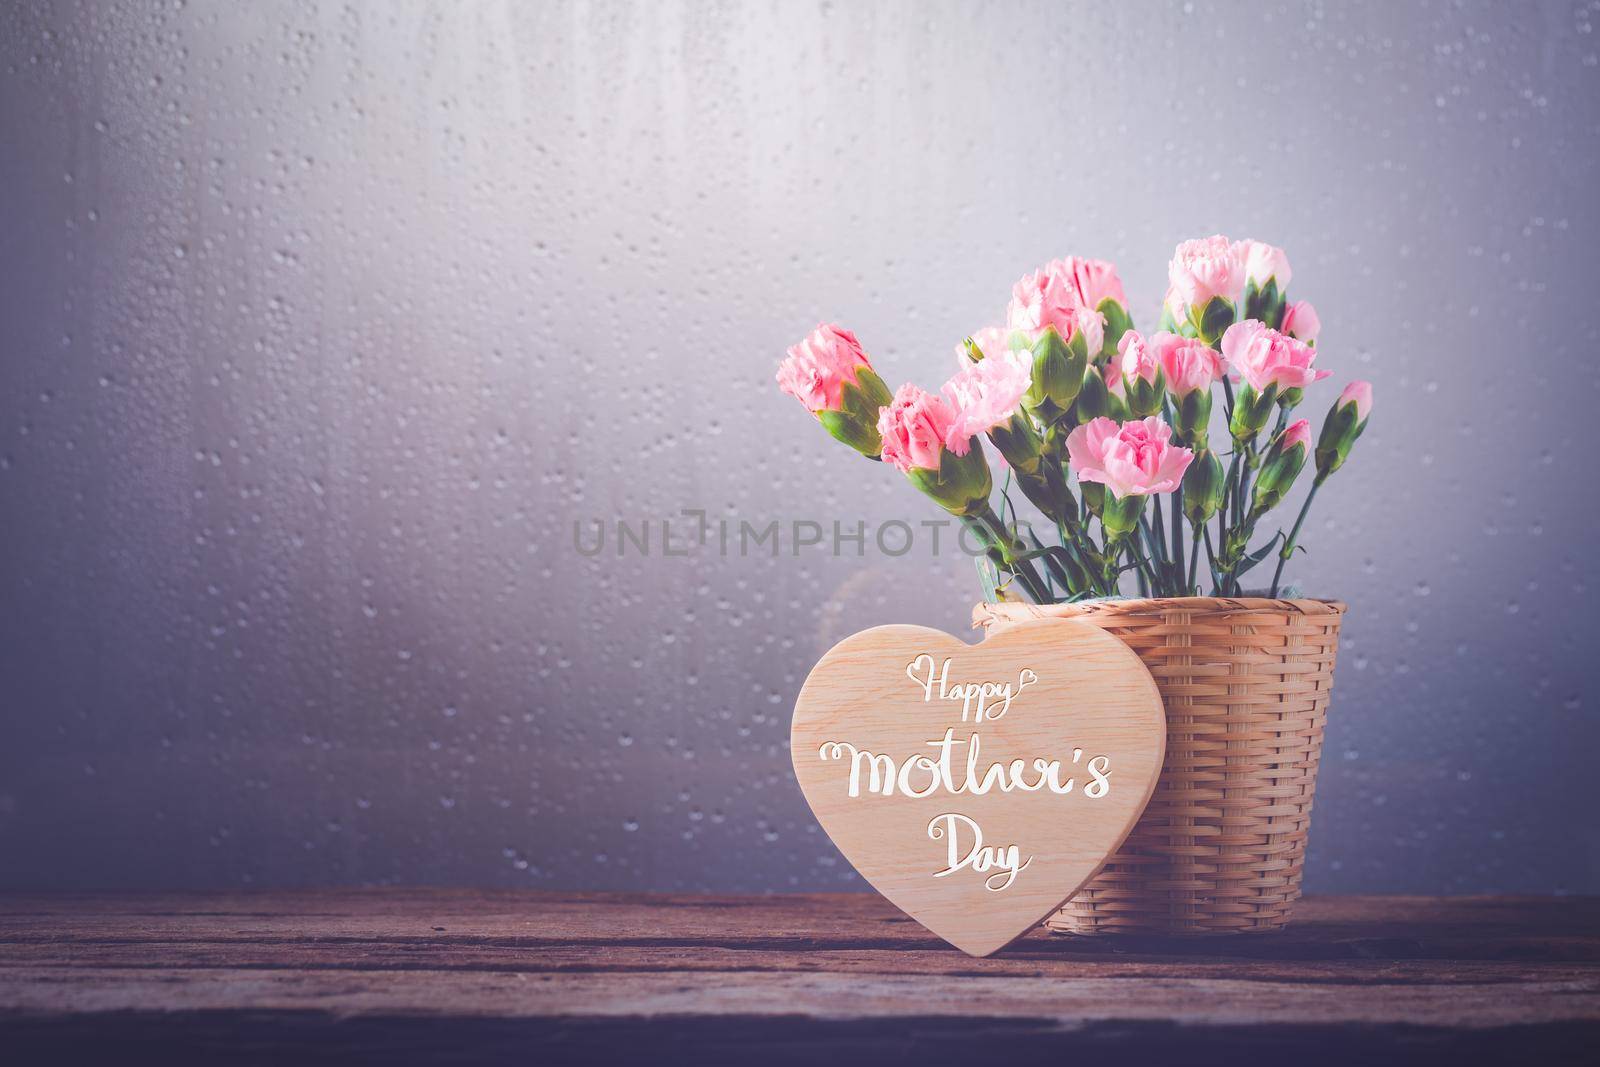 Still life with sweet carnation flowers in basket on wooden table, Mothers day concept With a message for Happy Mother's Day on a wooden heart